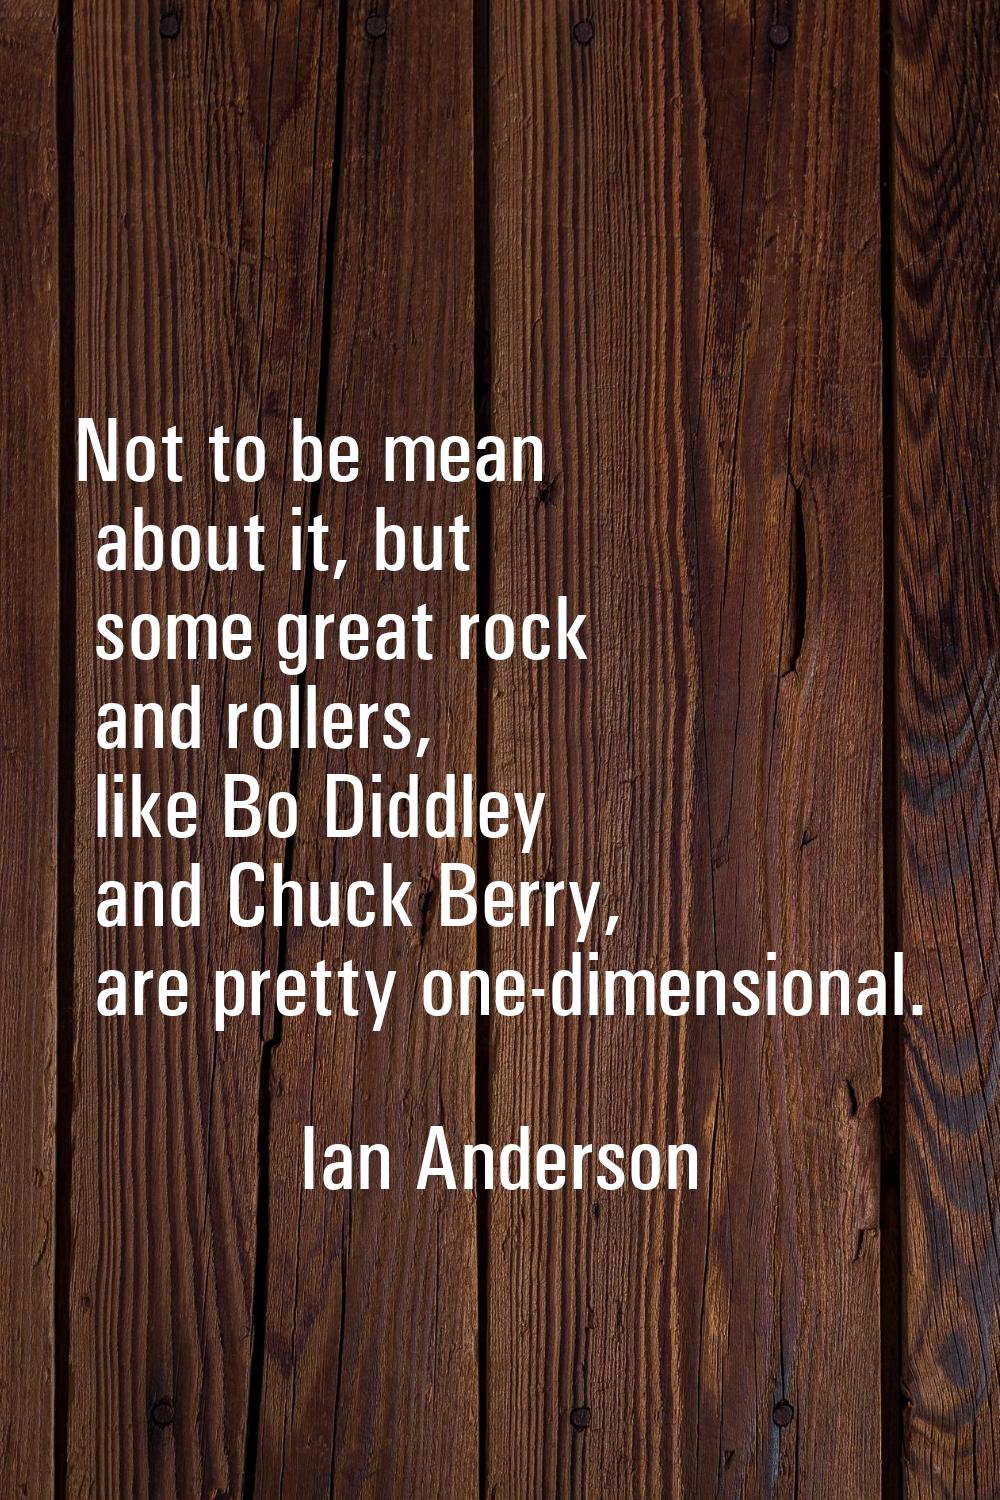 Not to be mean about it, but some great rock and rollers, like Bo Diddley and Chuck Berry, are pret